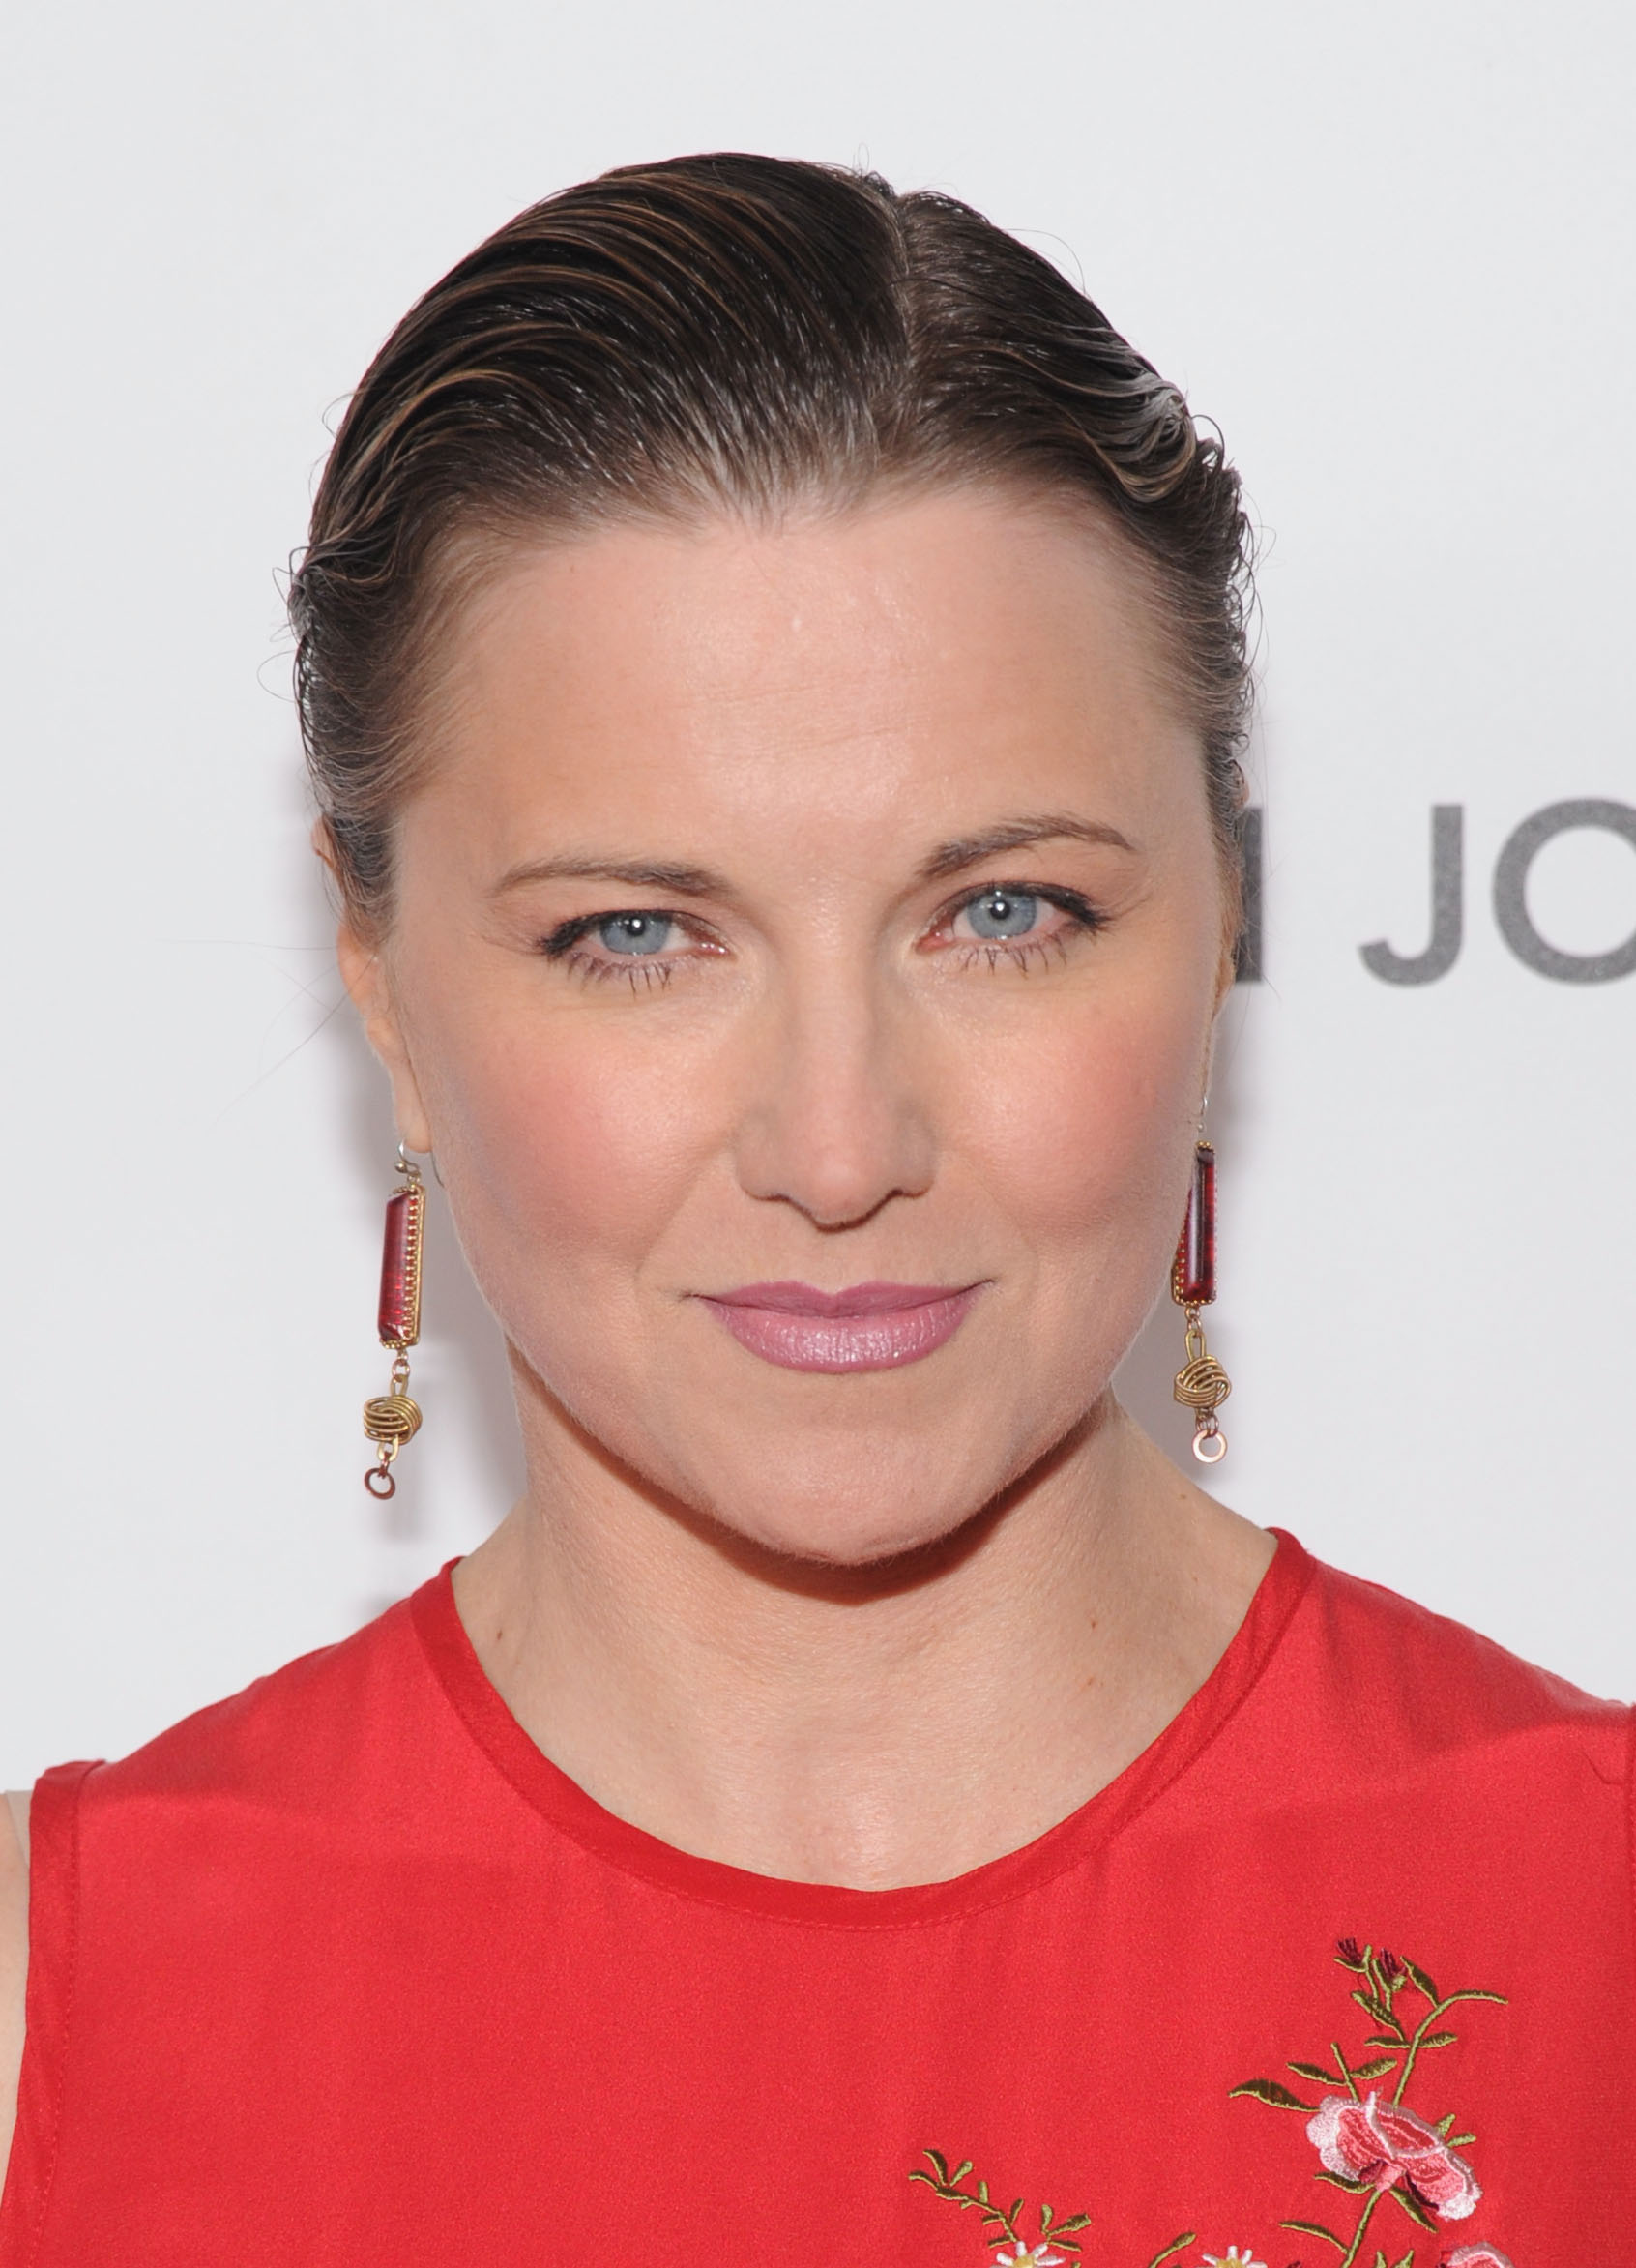 What Lucy Lawless' 'Agents of S.H.I.E.L.D.' Character Could Learn From